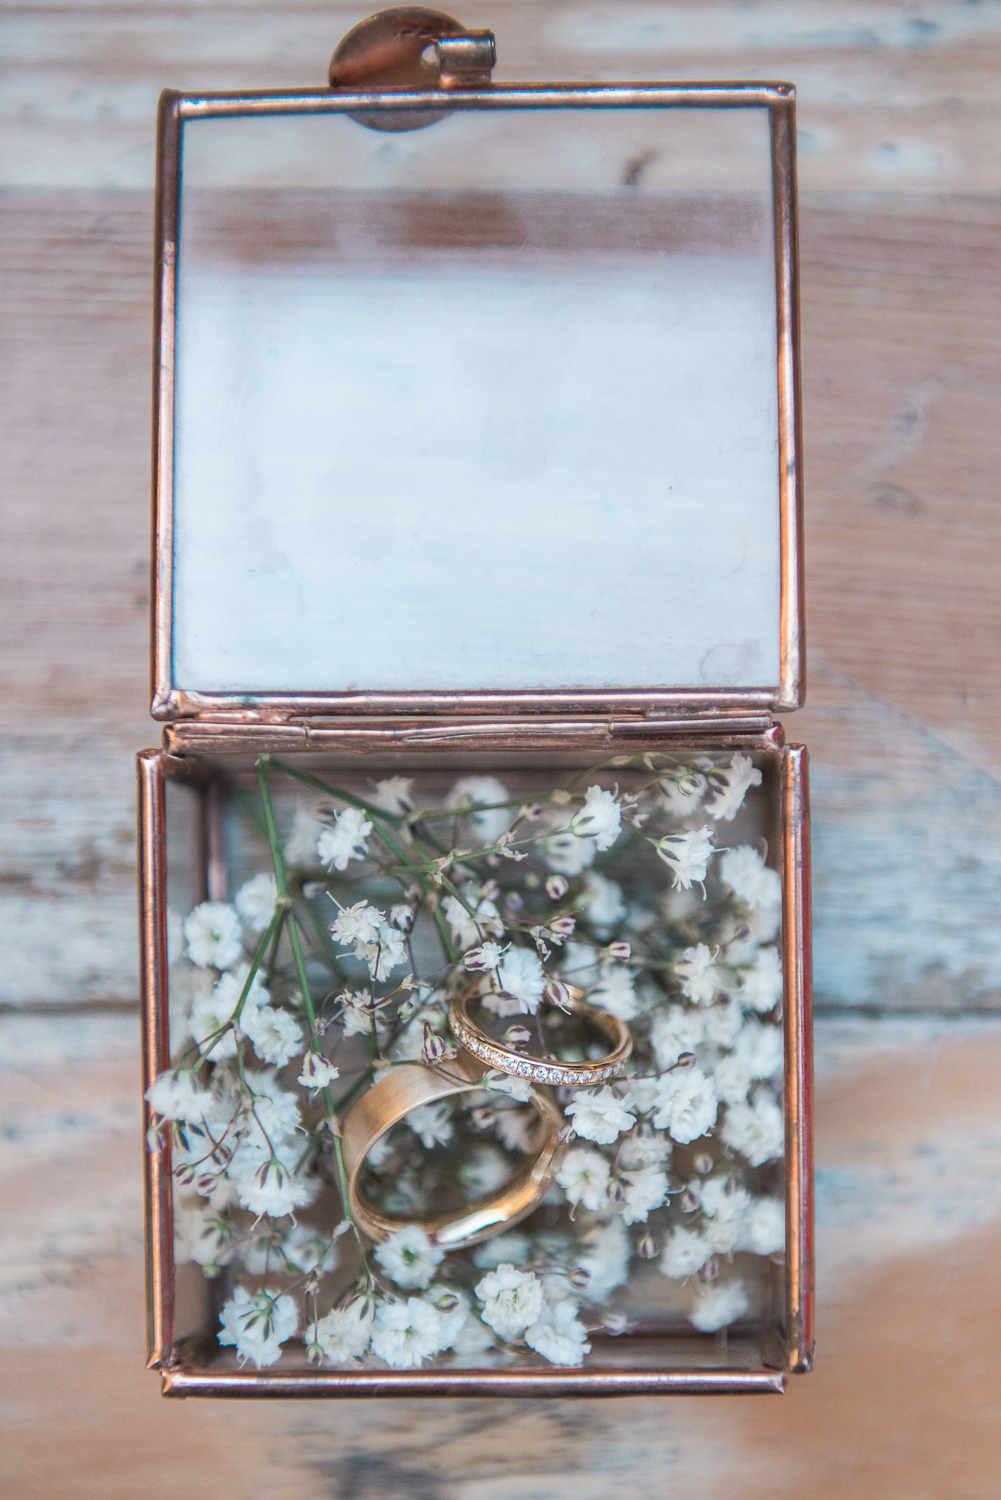 Gold wedding rings in a copper glass ring box